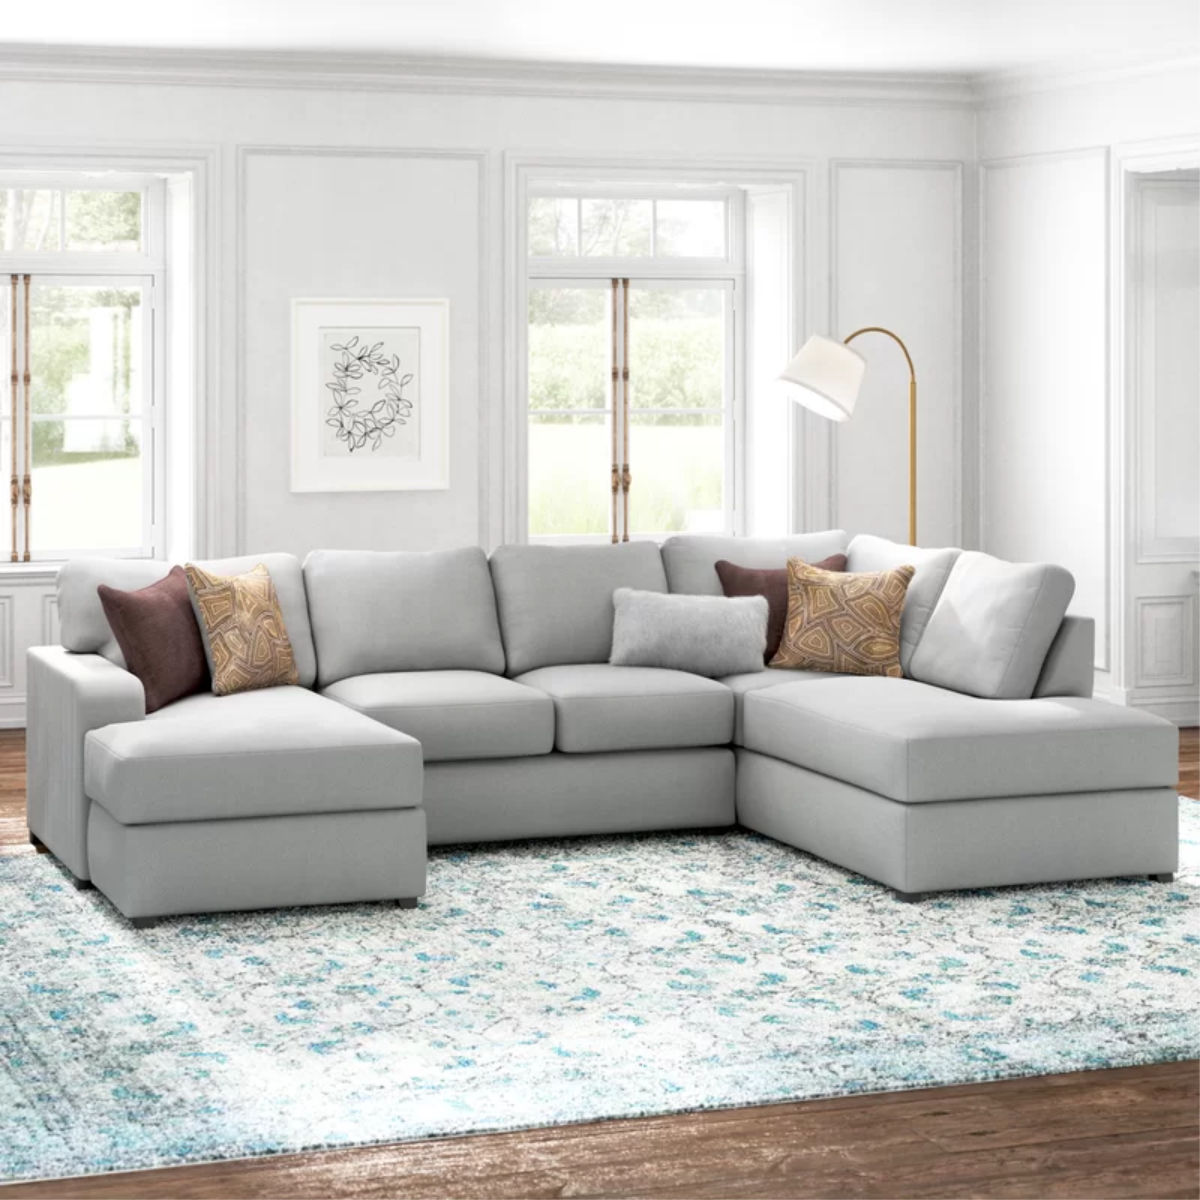 Kelly Clarkson Home Conley Right Hand Facing Sectional Sofa